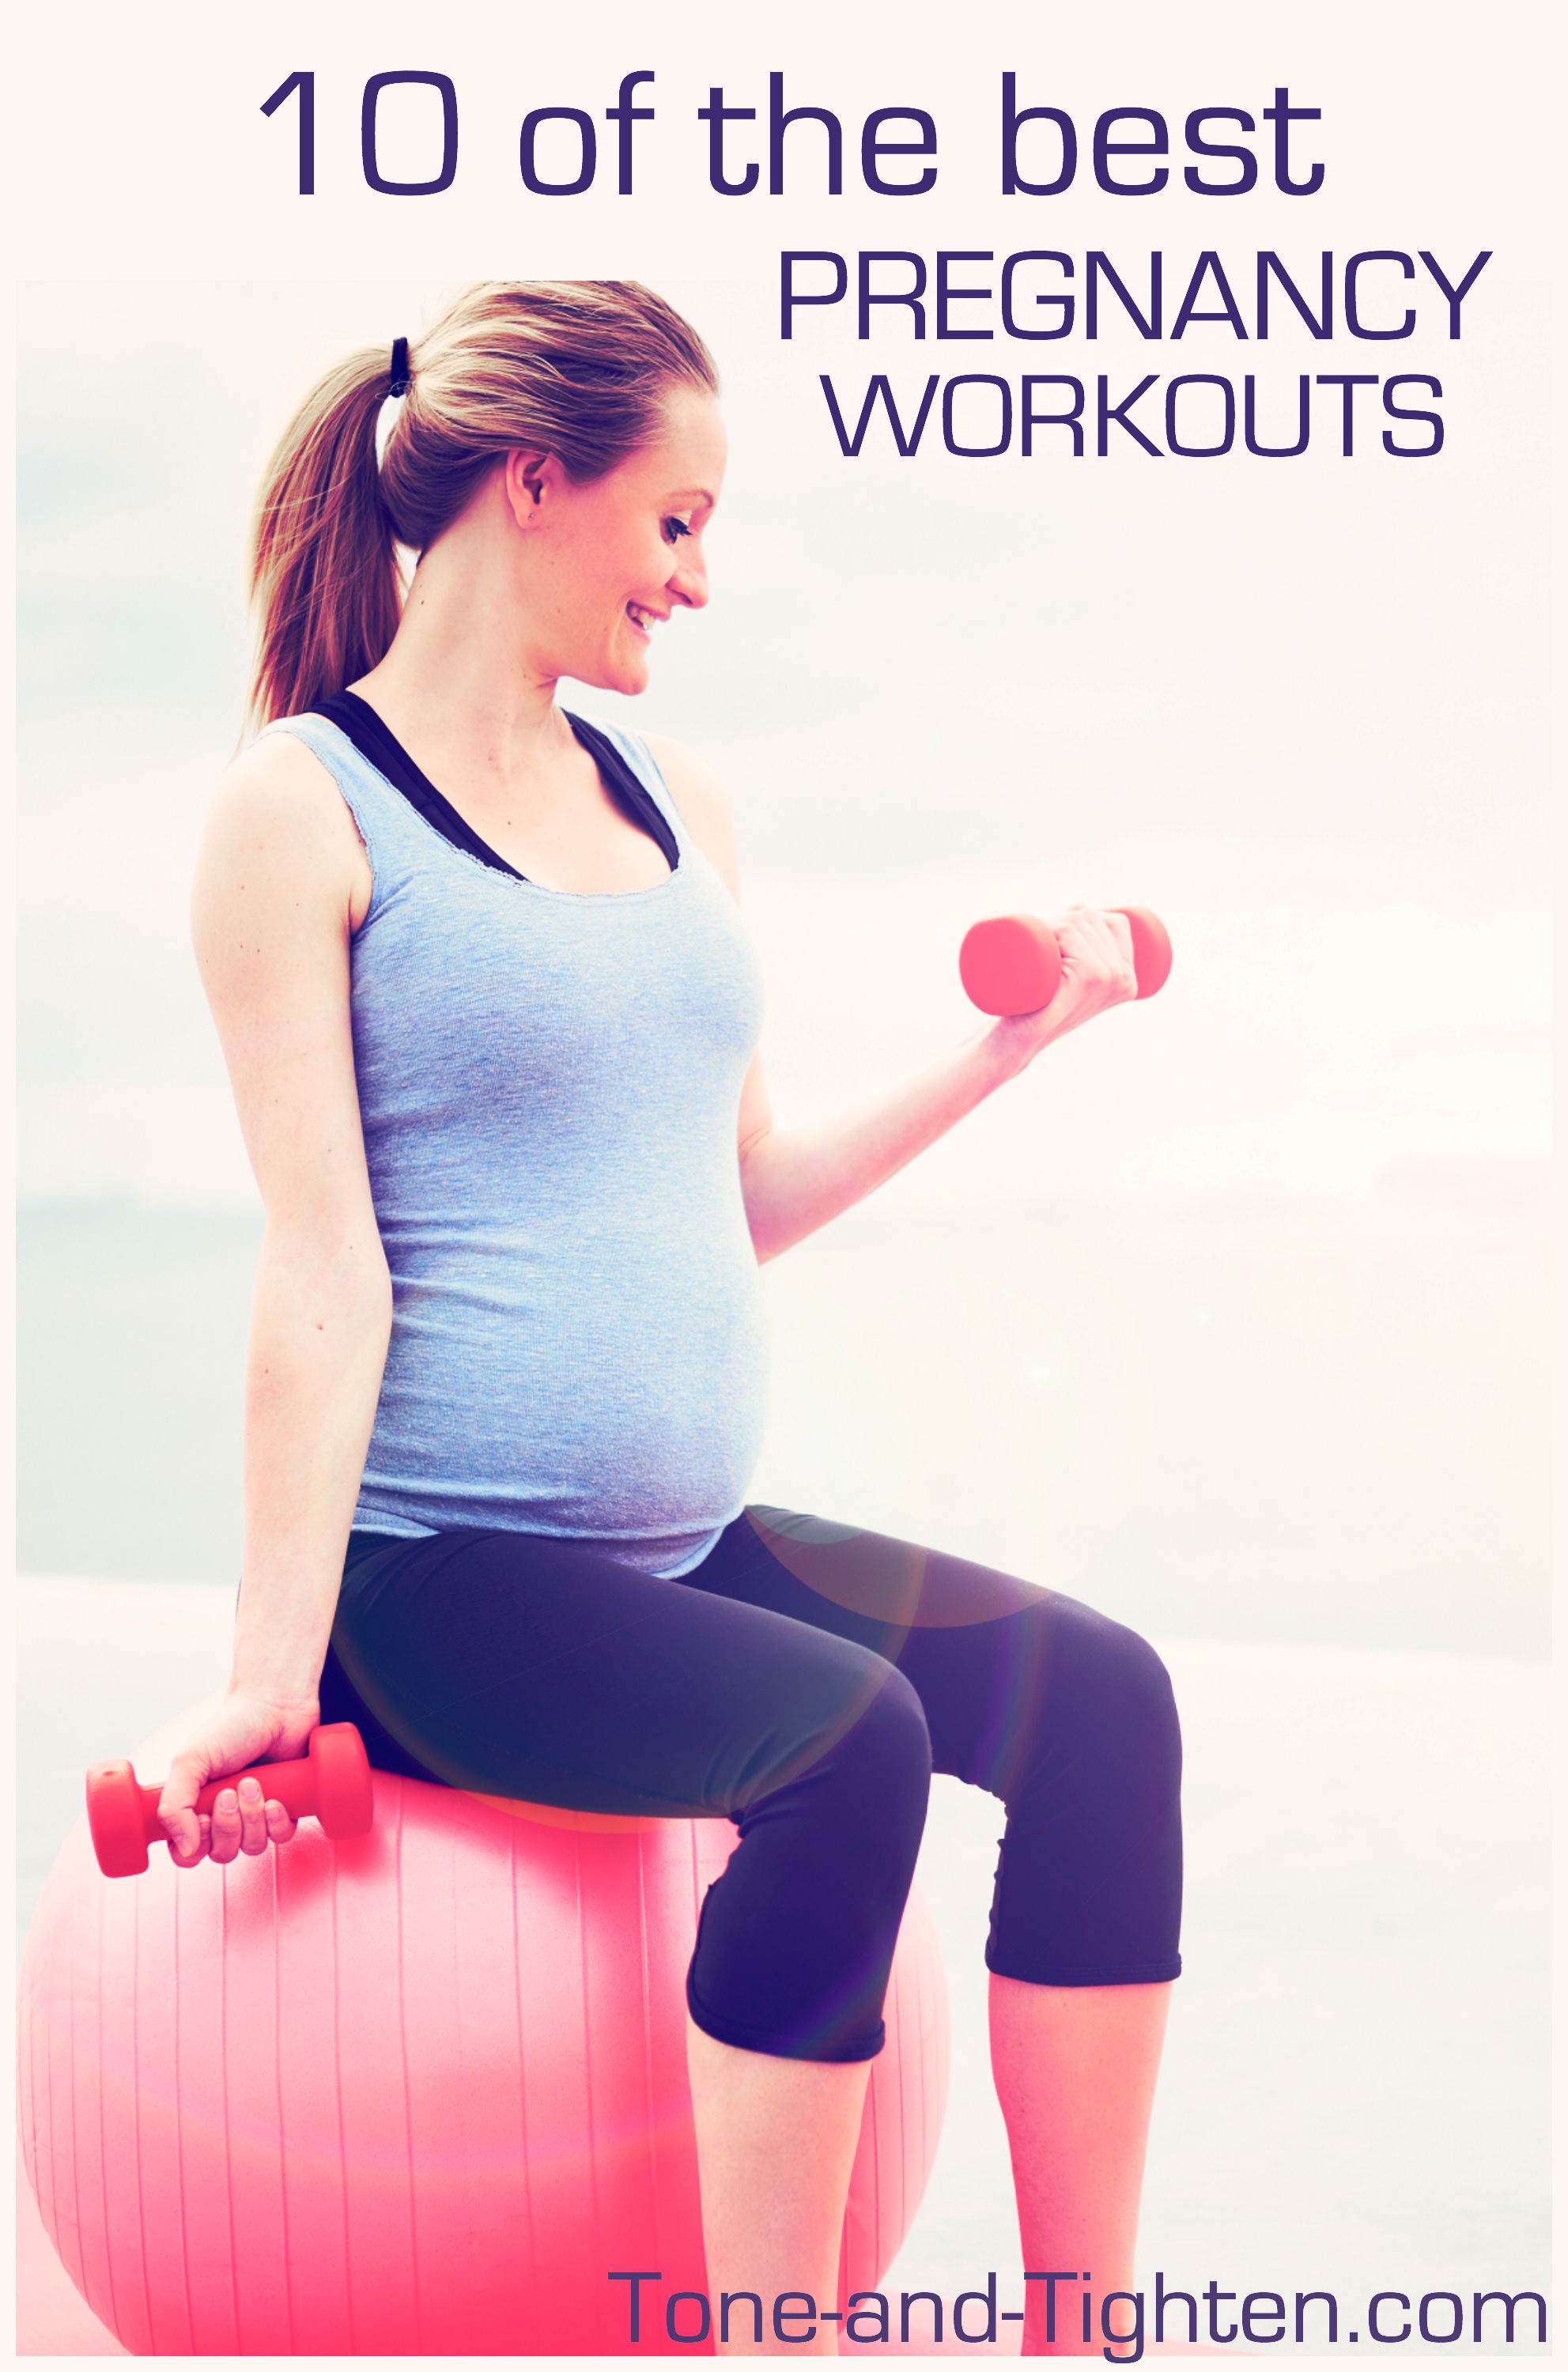 10 of the Best Pregnancy Workouts | Tone and Tighten